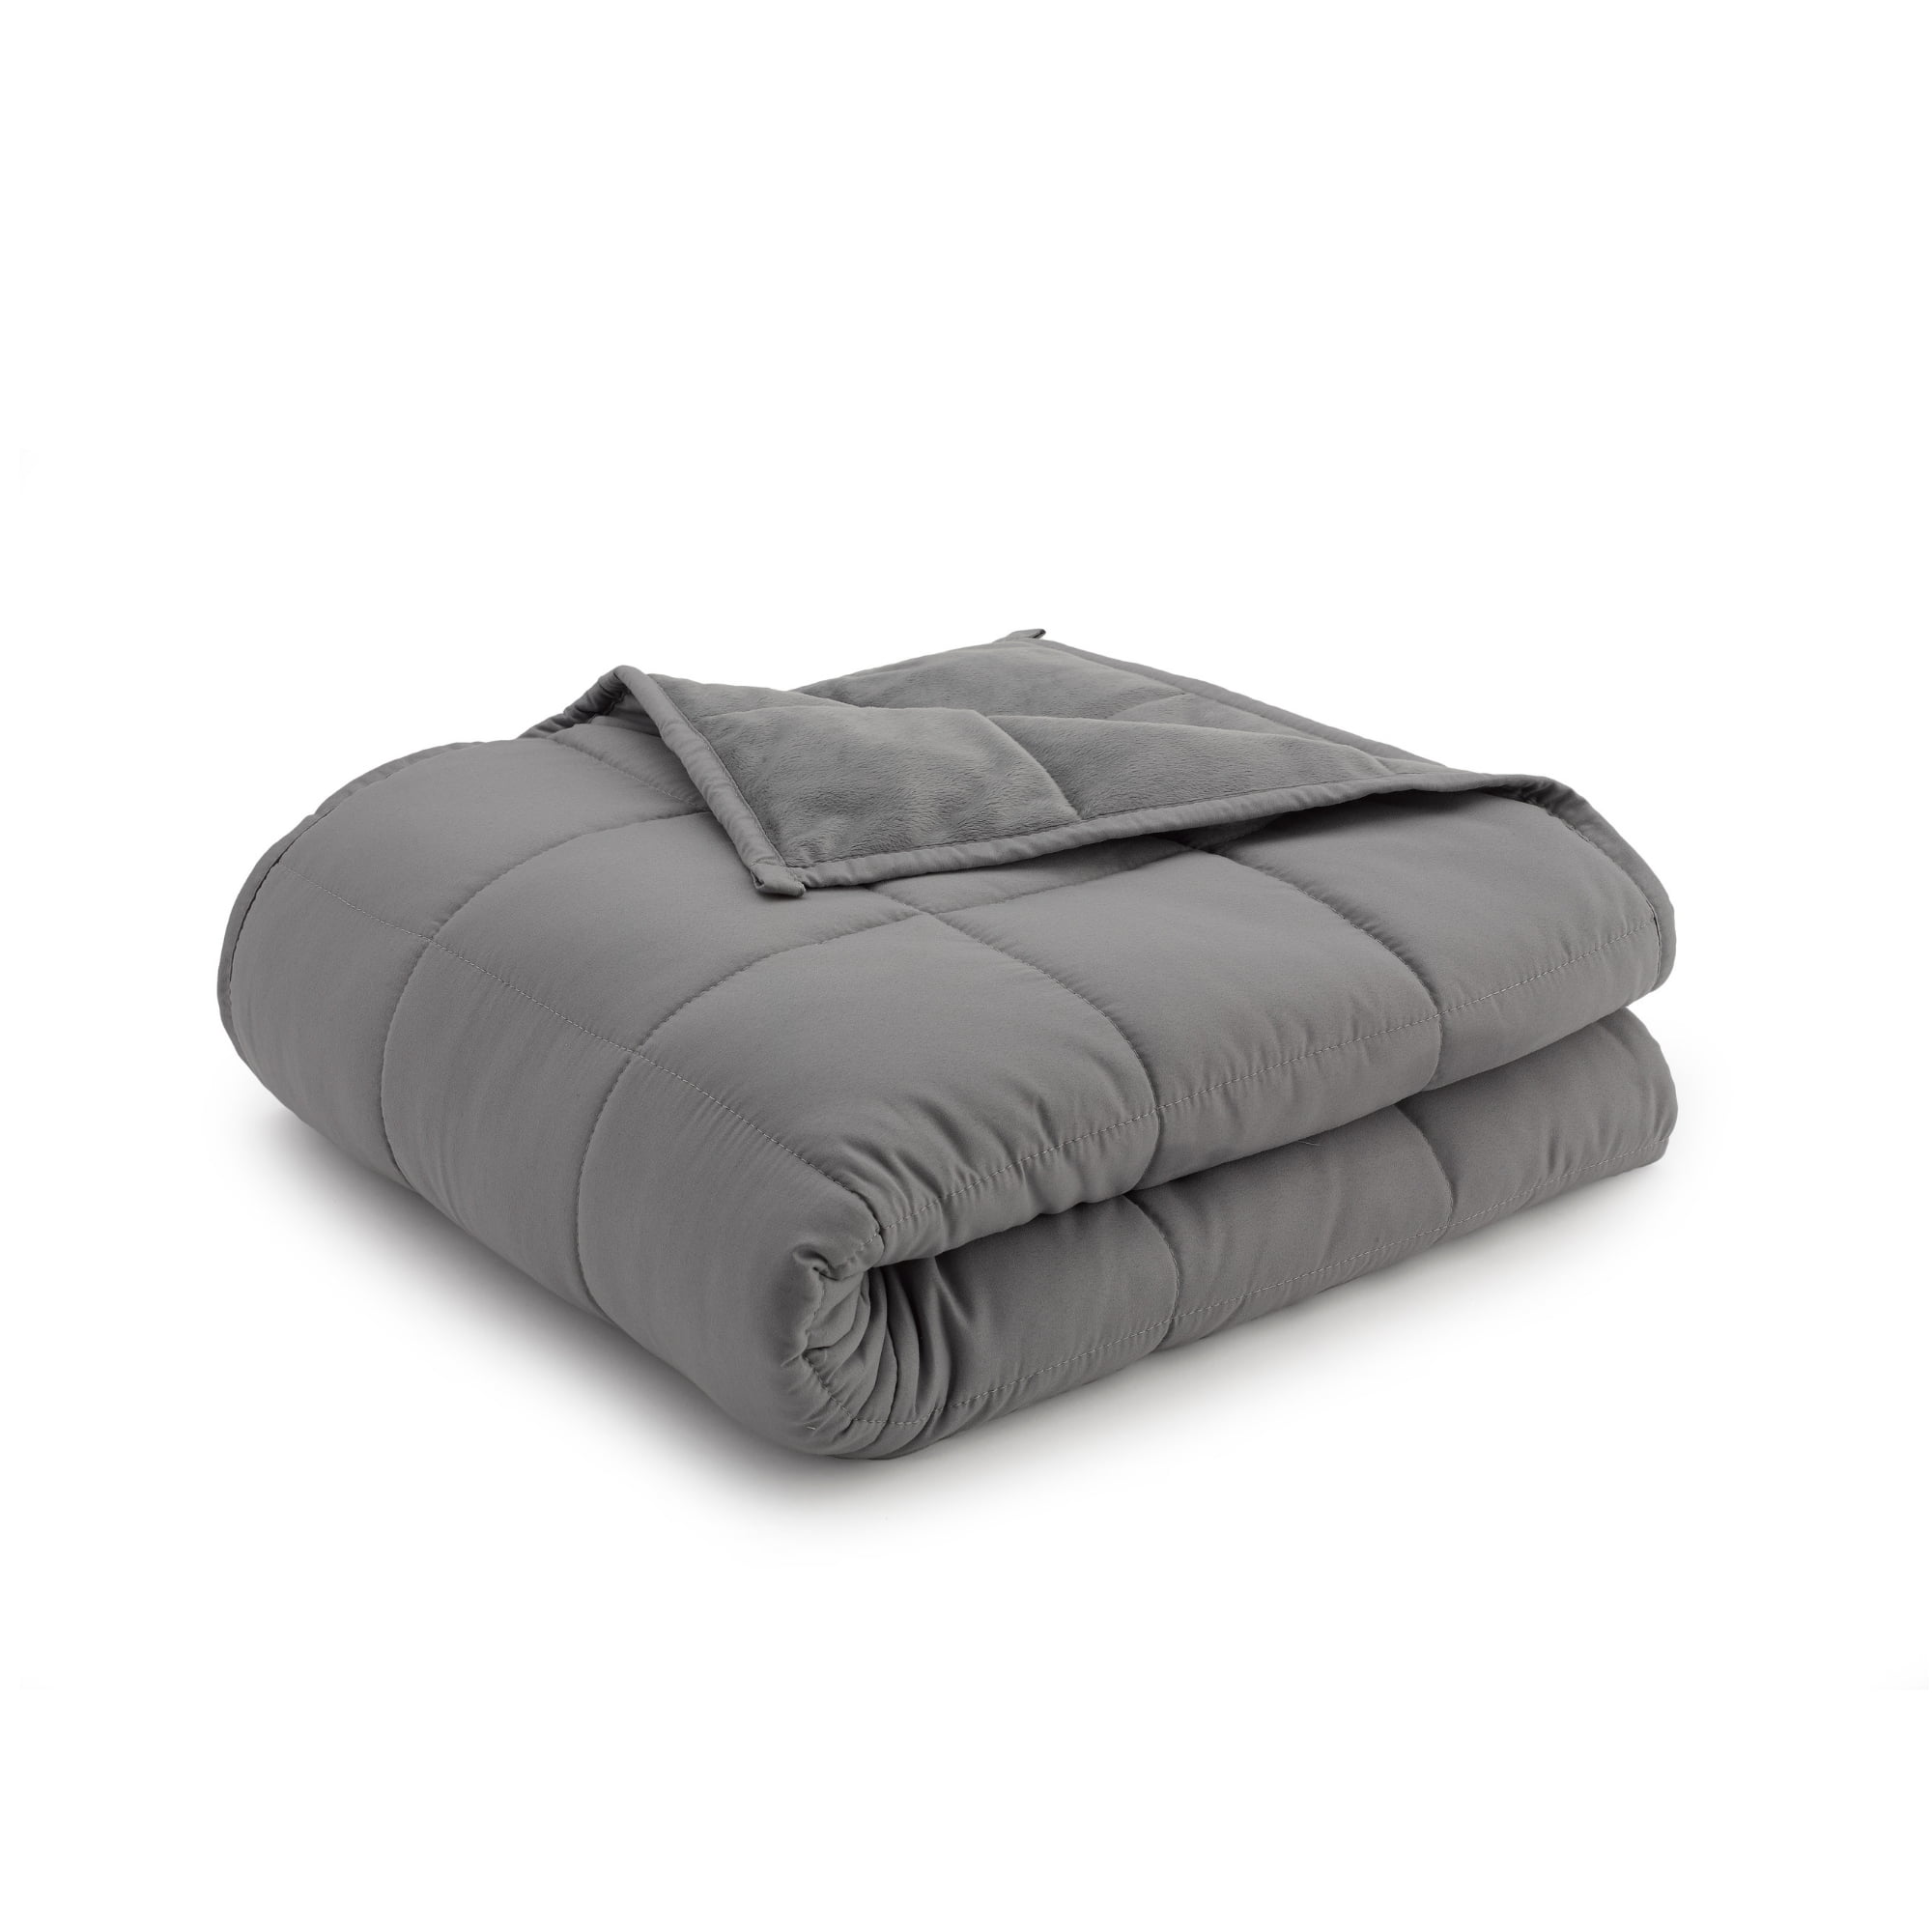 15IB TRYREST WEIGHTED BLANKET GRAY 